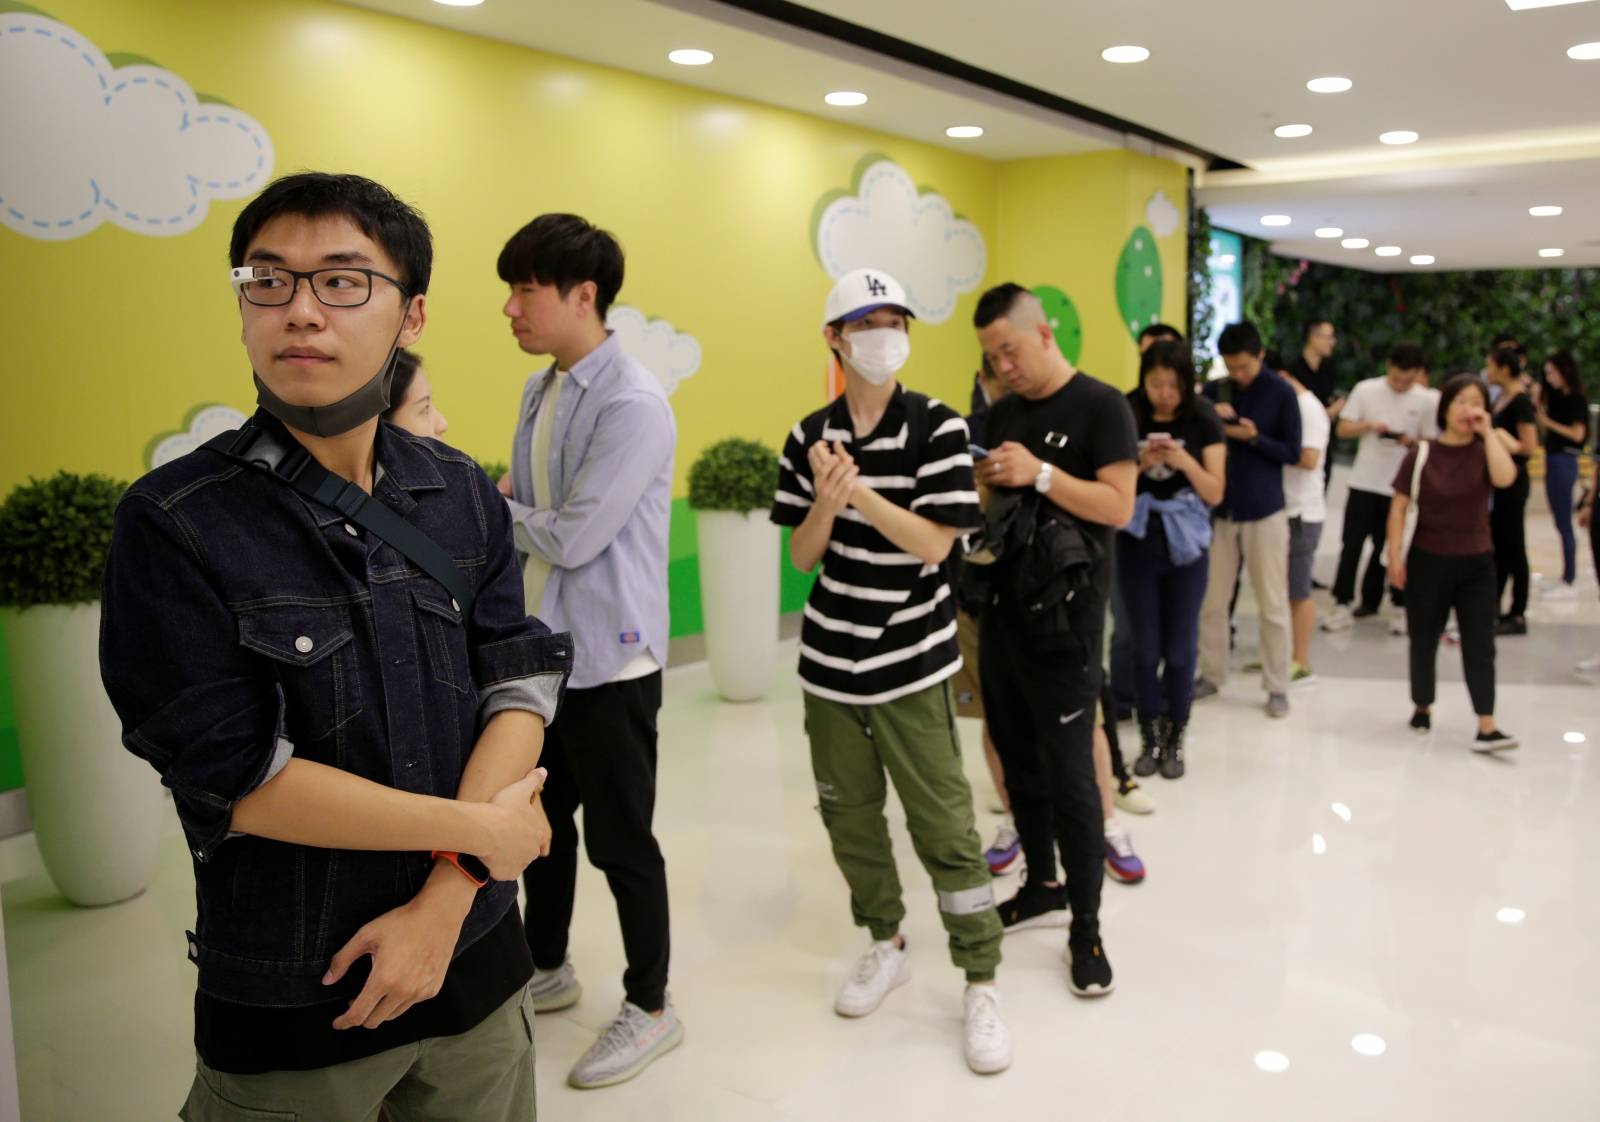 Customers wait outside an Apple Store before Apple's new iPhone 11, 11 Pro and 11 Pro Max go on sale in Beijing